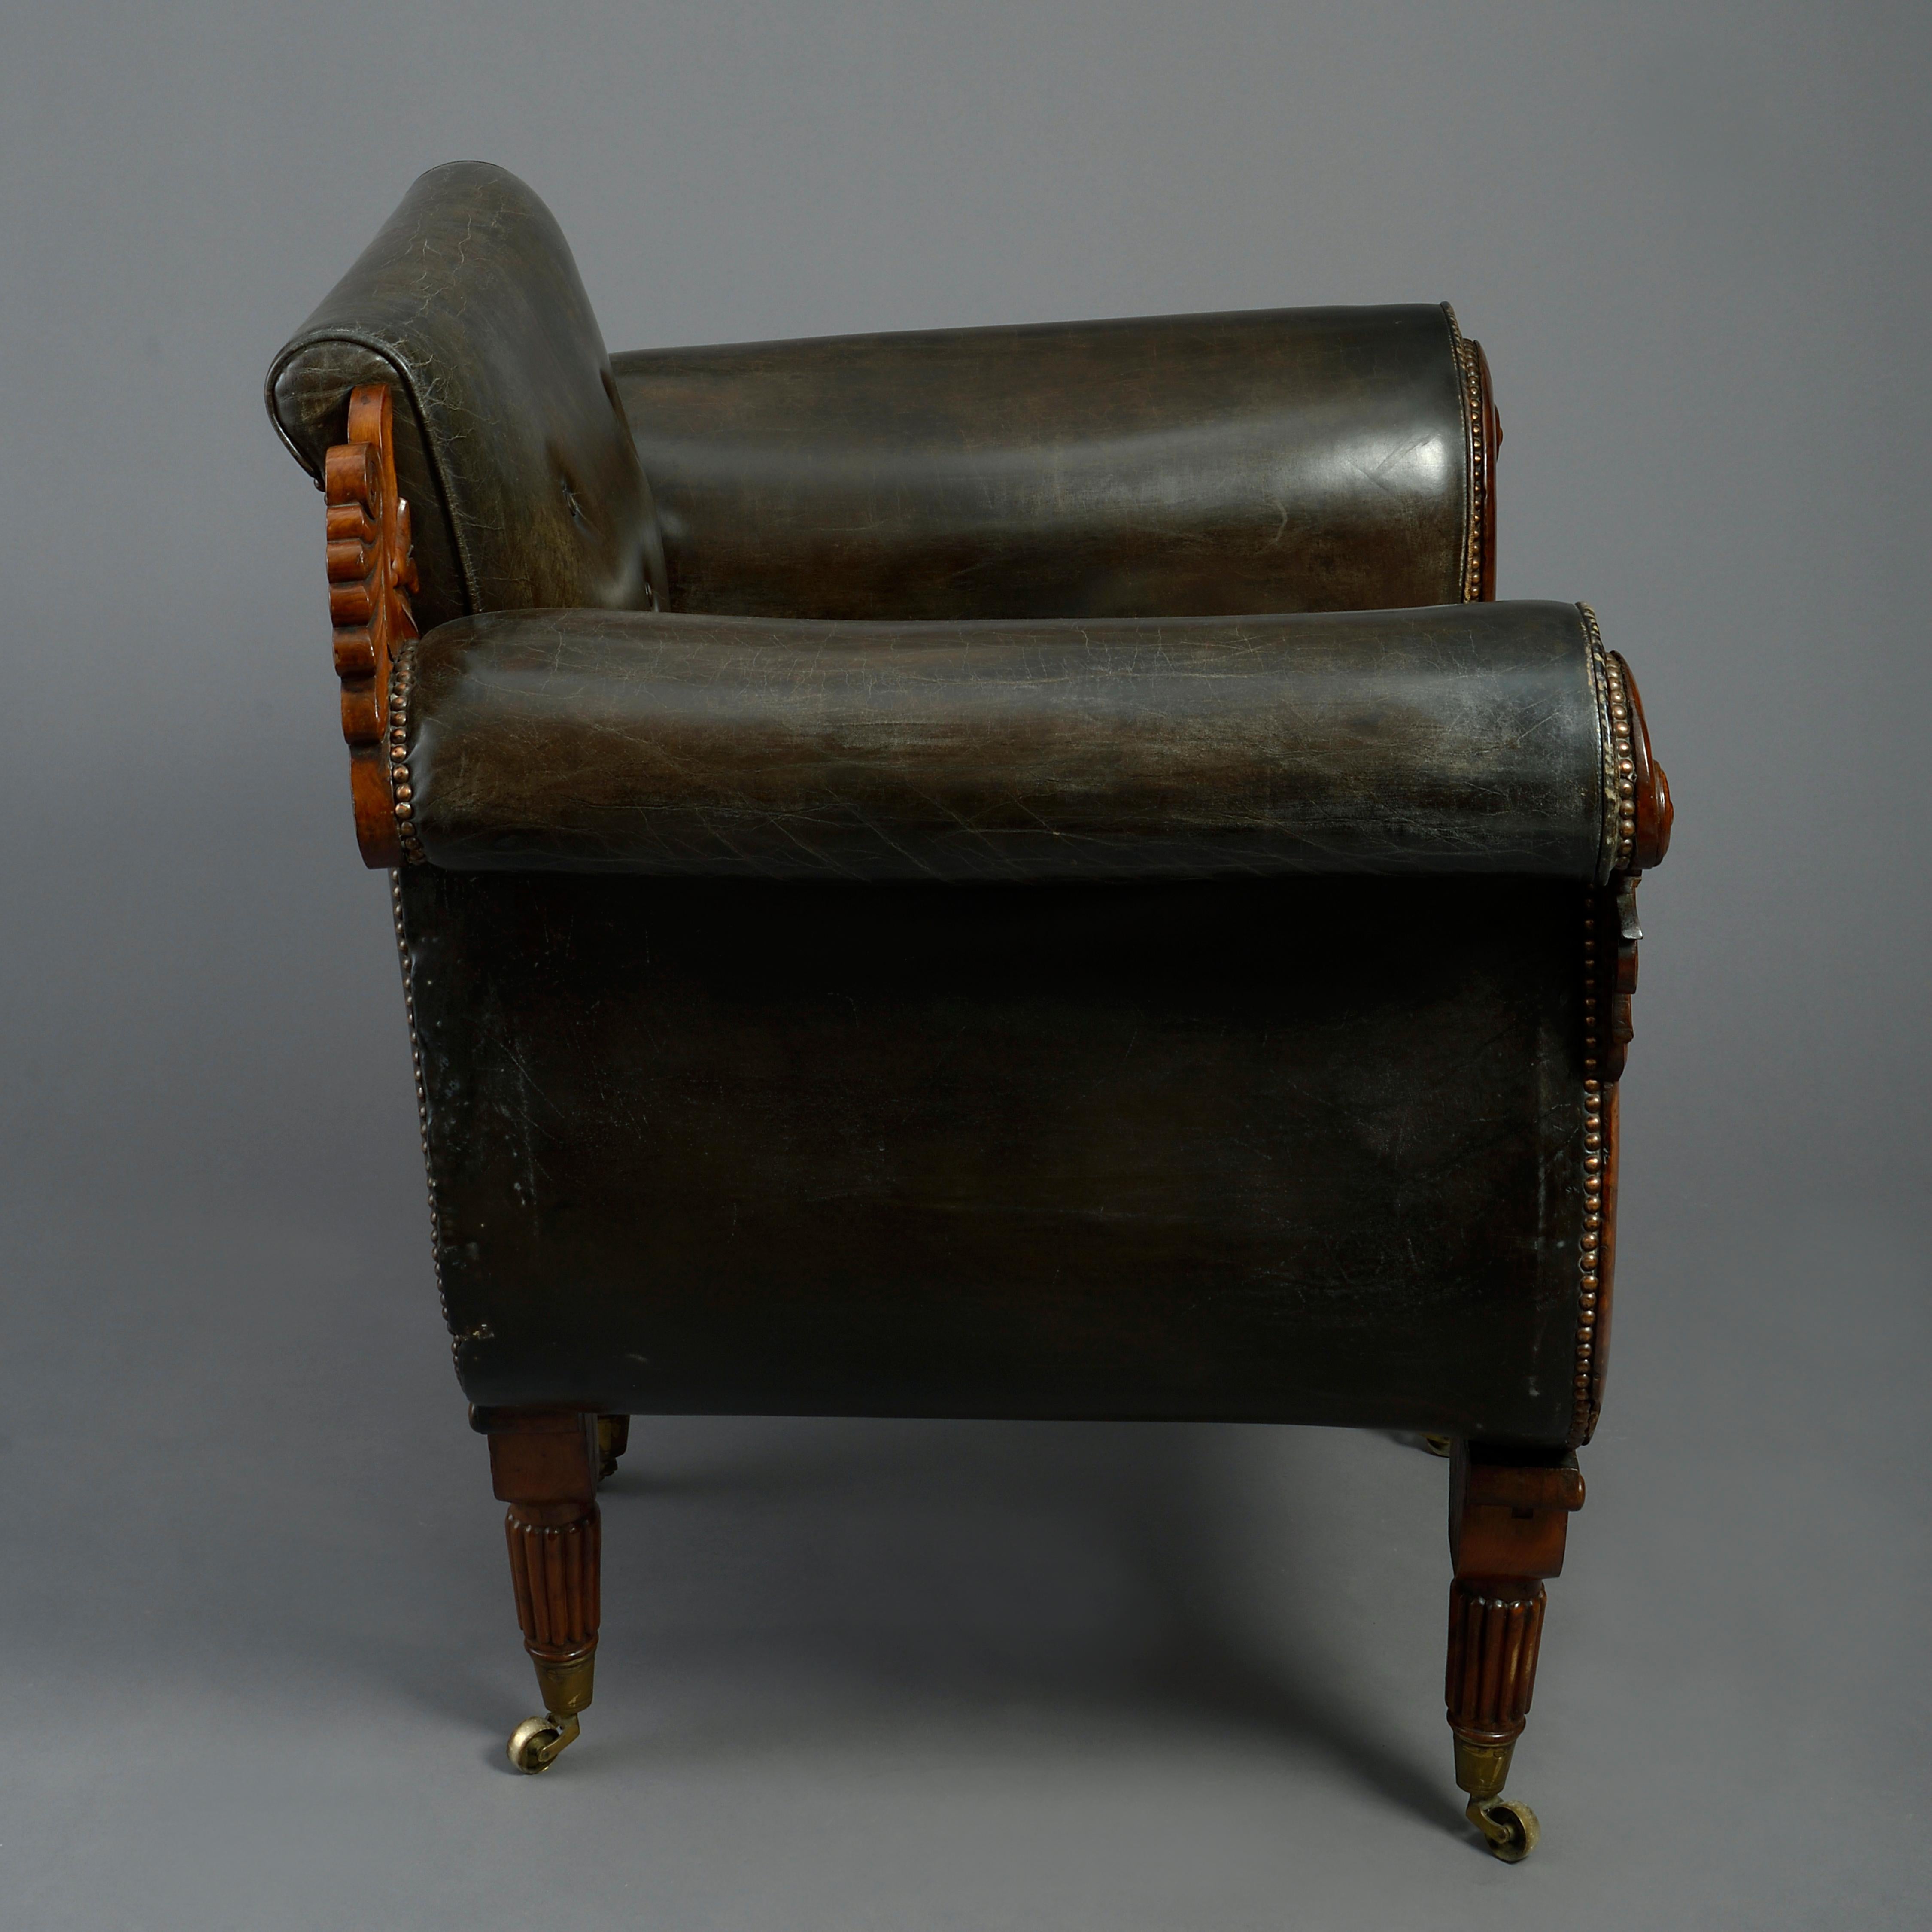 Hand-Carved Rare Early 19th Century Regency Burr Yew Bergere Armchair